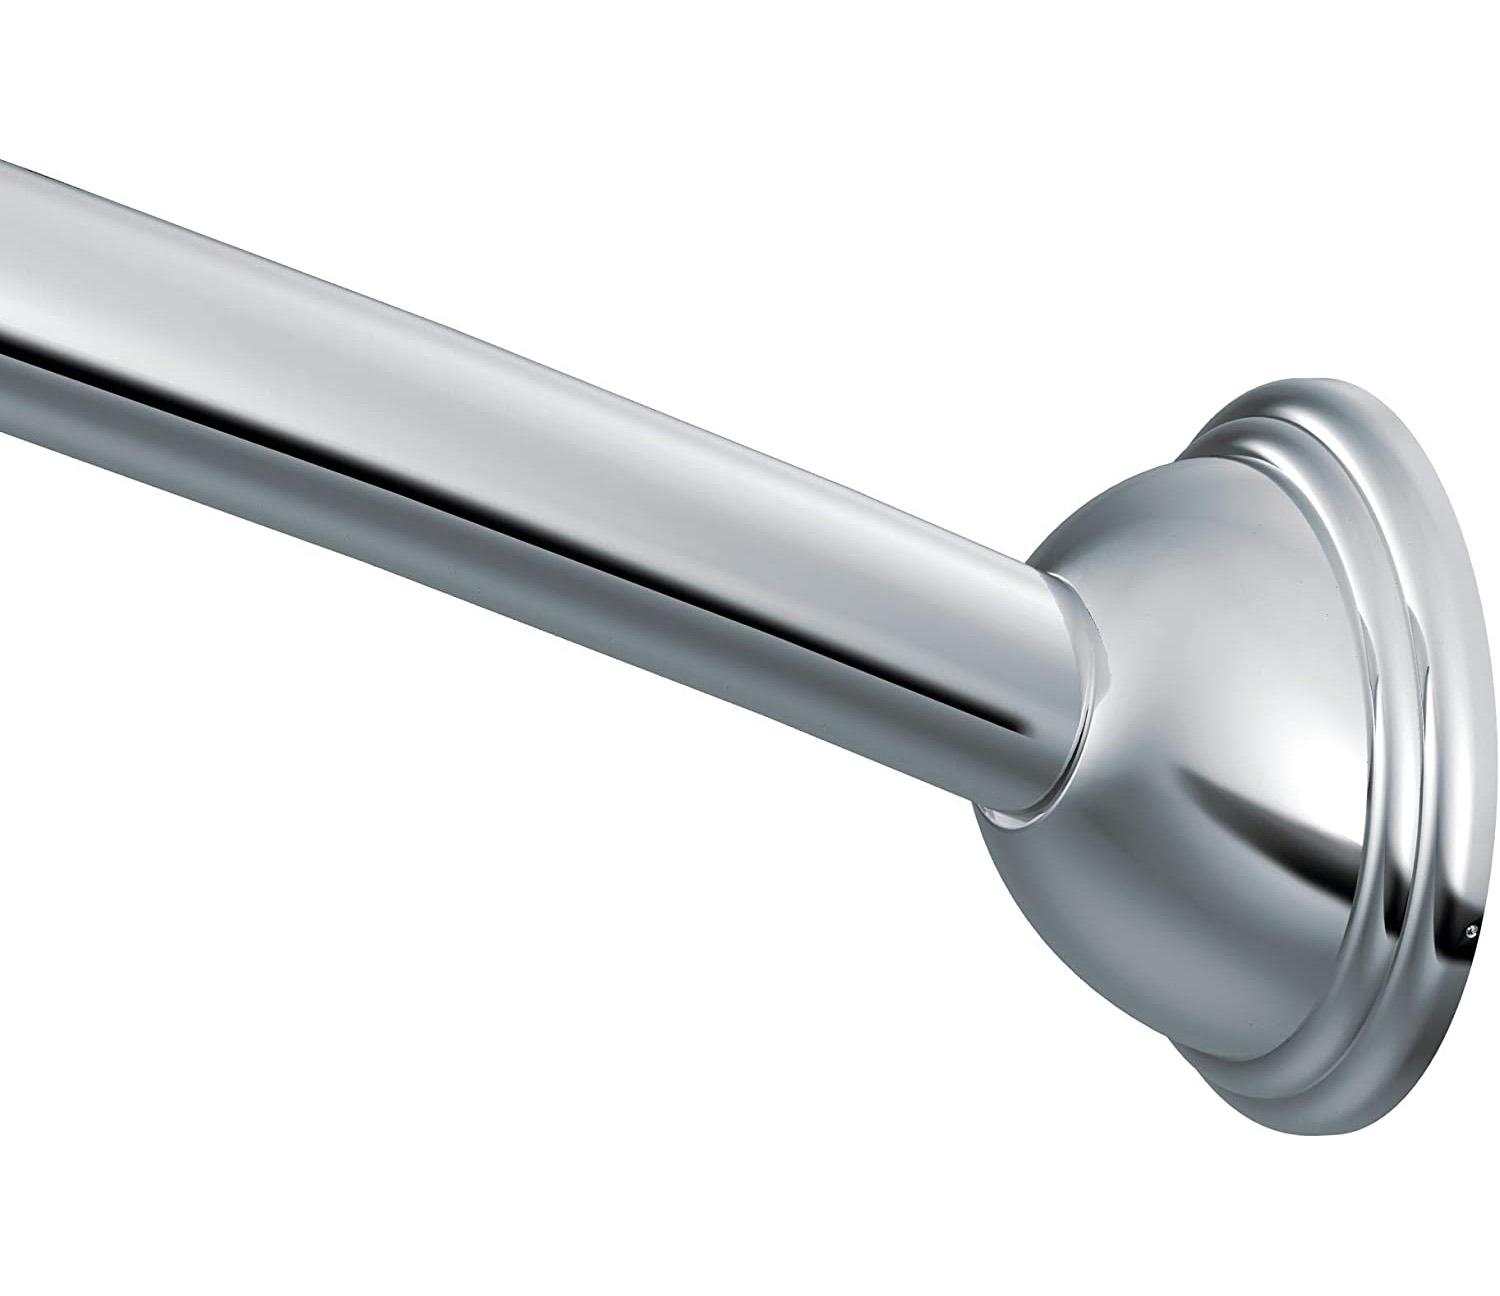 Moen 54 to 72in Adjustable Length Curved Shower Rod for $22.42